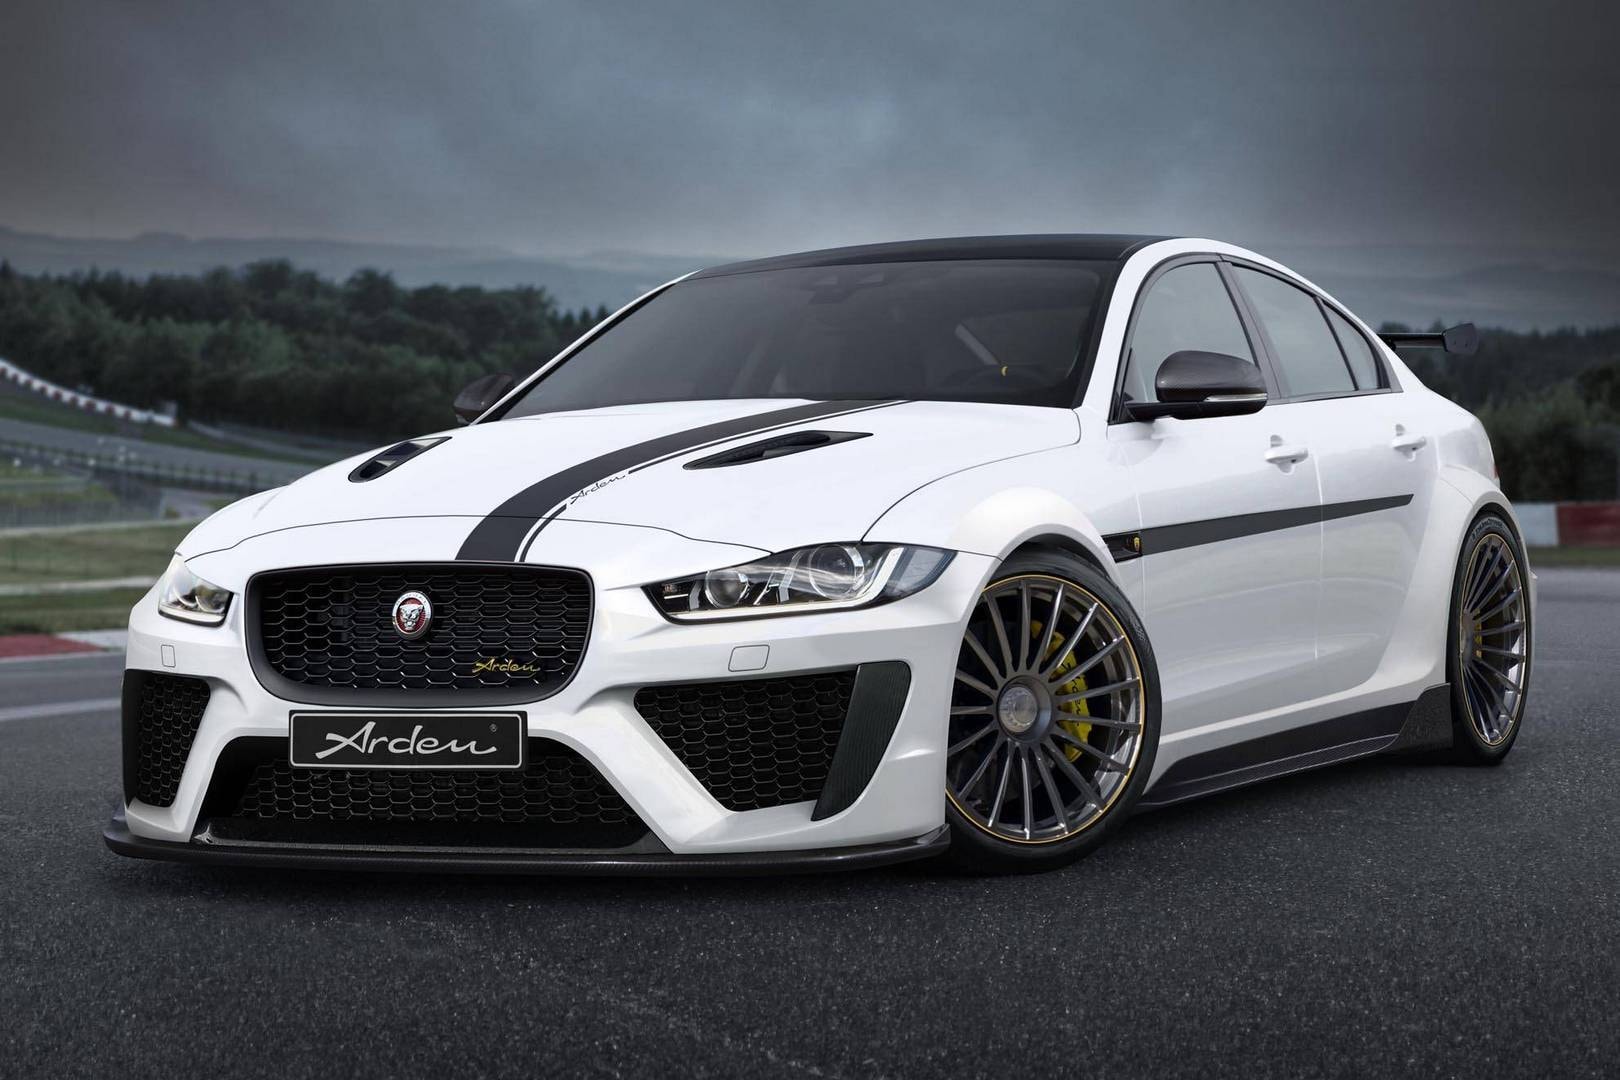 Jaguar XE Gets Widebody Kit from Arden, Supercharged V6 Makes 463 HP ...